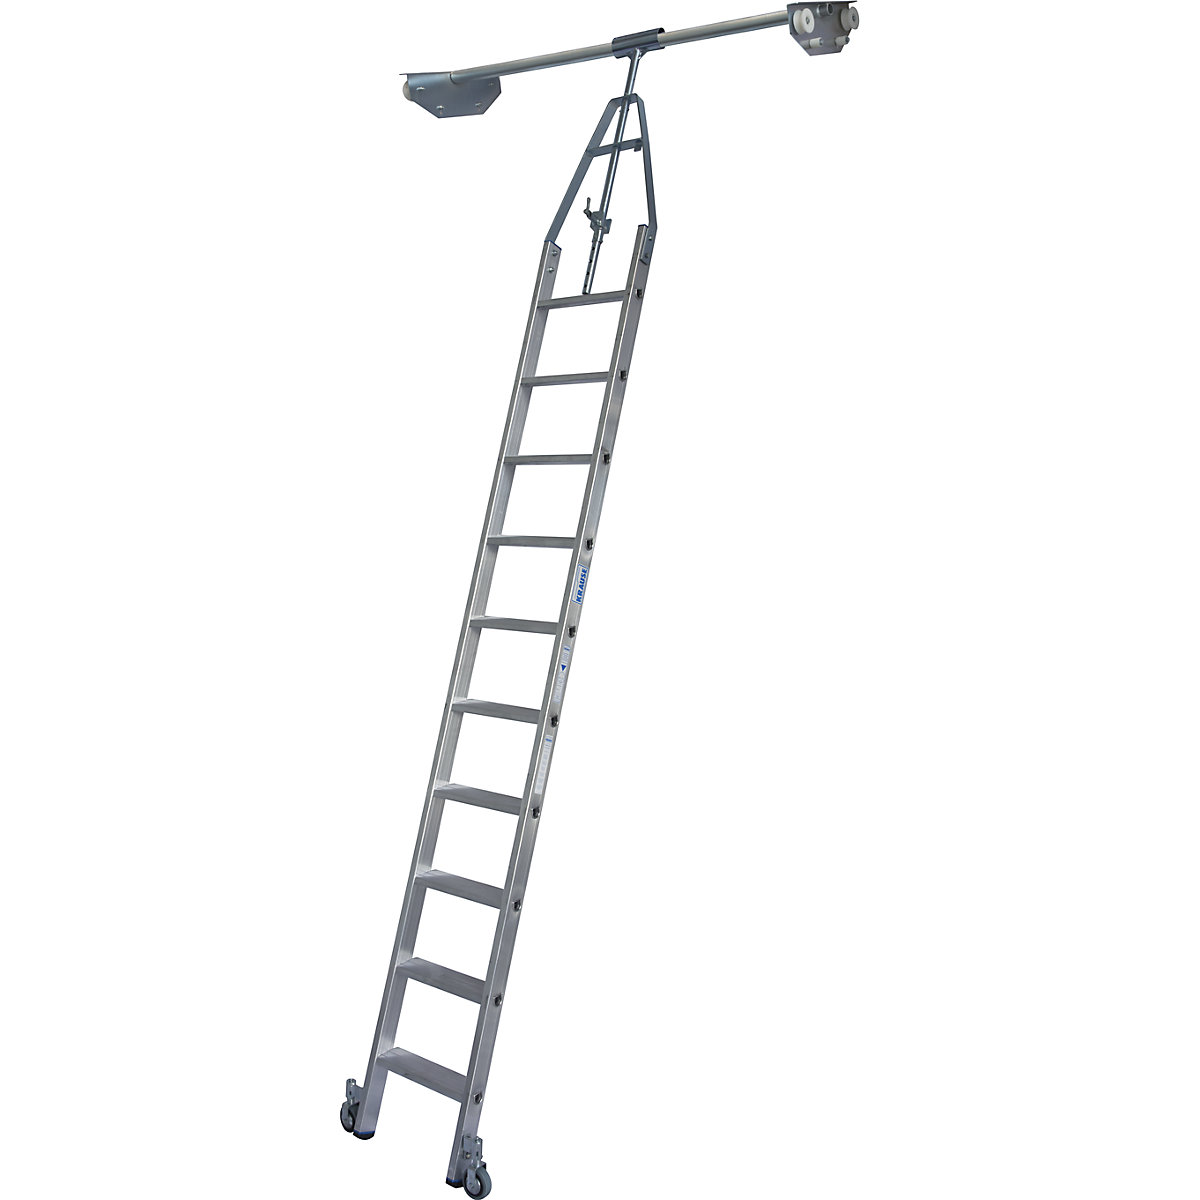 Step shelf ladder – KRAUSE, double sided shelf unit with wheel unit on top for round tubing rail system, 10 steps-5